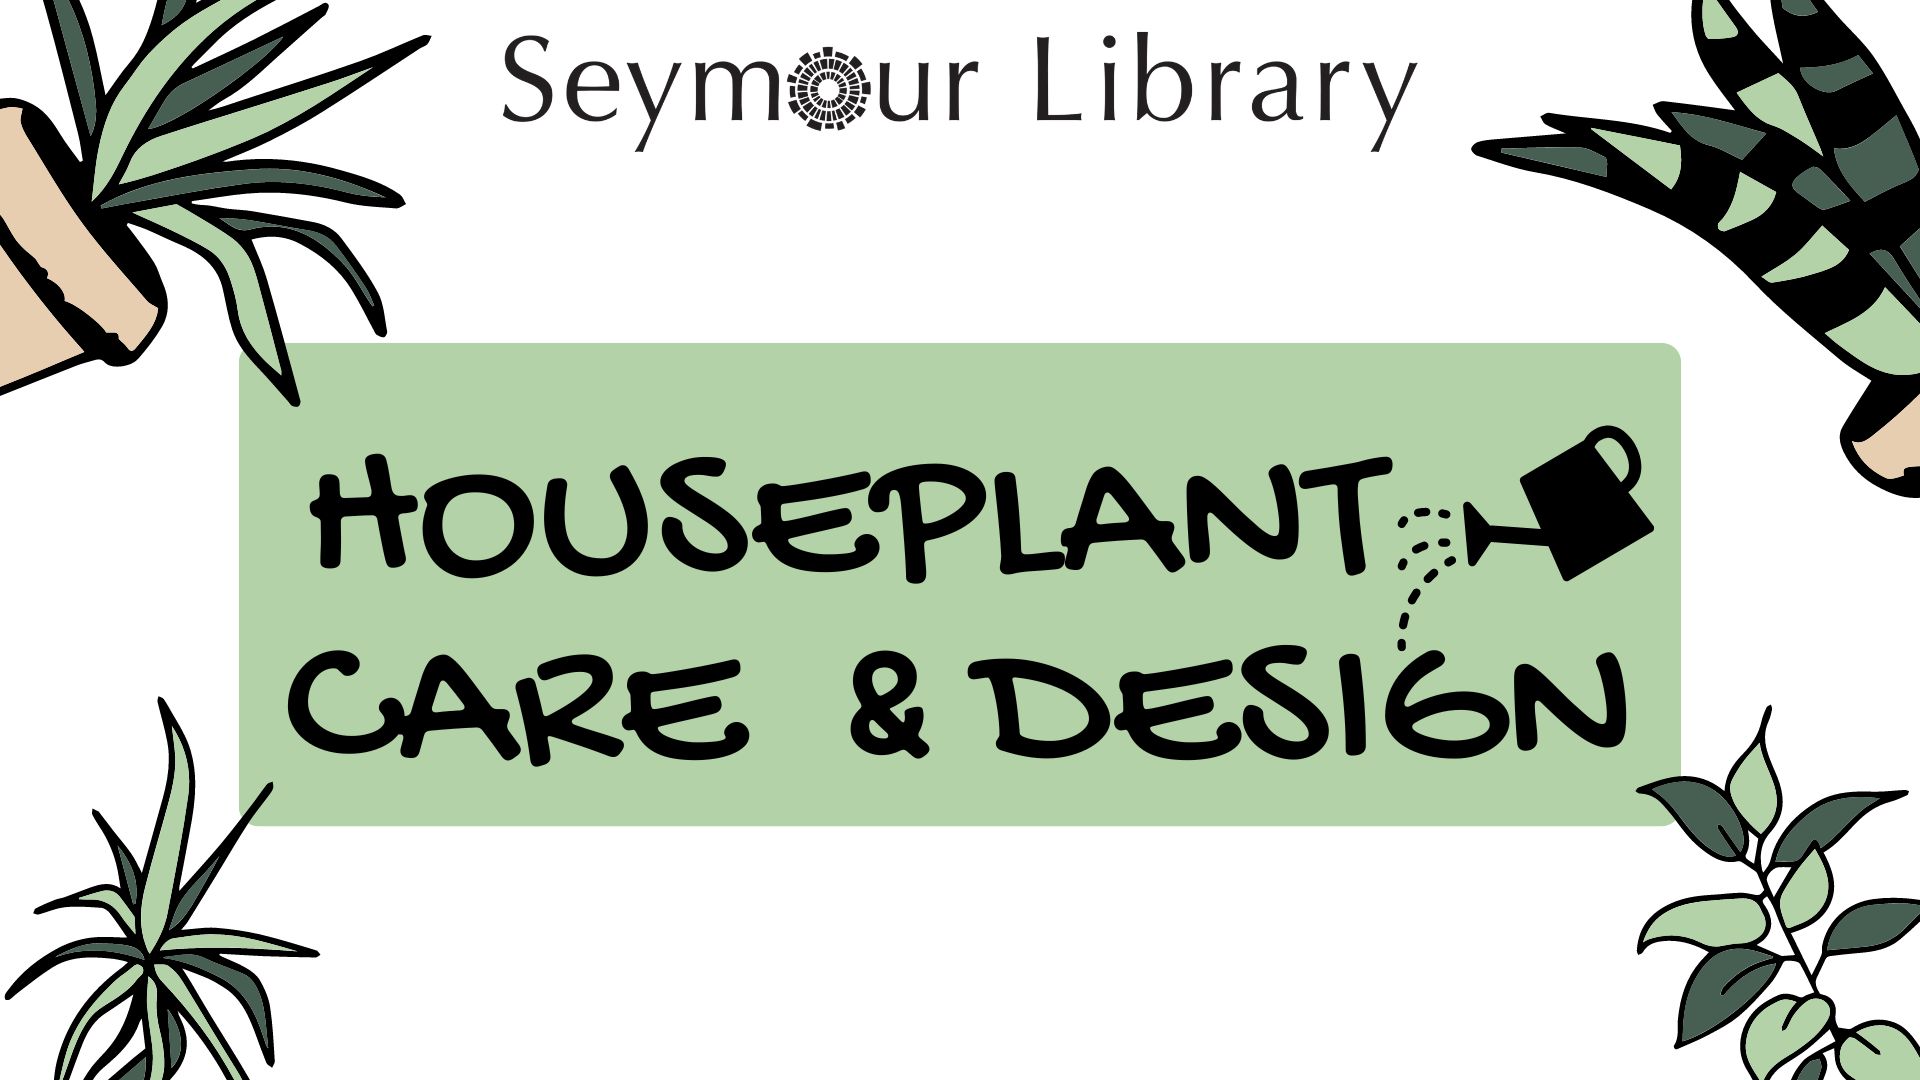 Housplant Care & Design - graphic with Seymour Library logo and a variety of tradtional houseplants with a watering can.